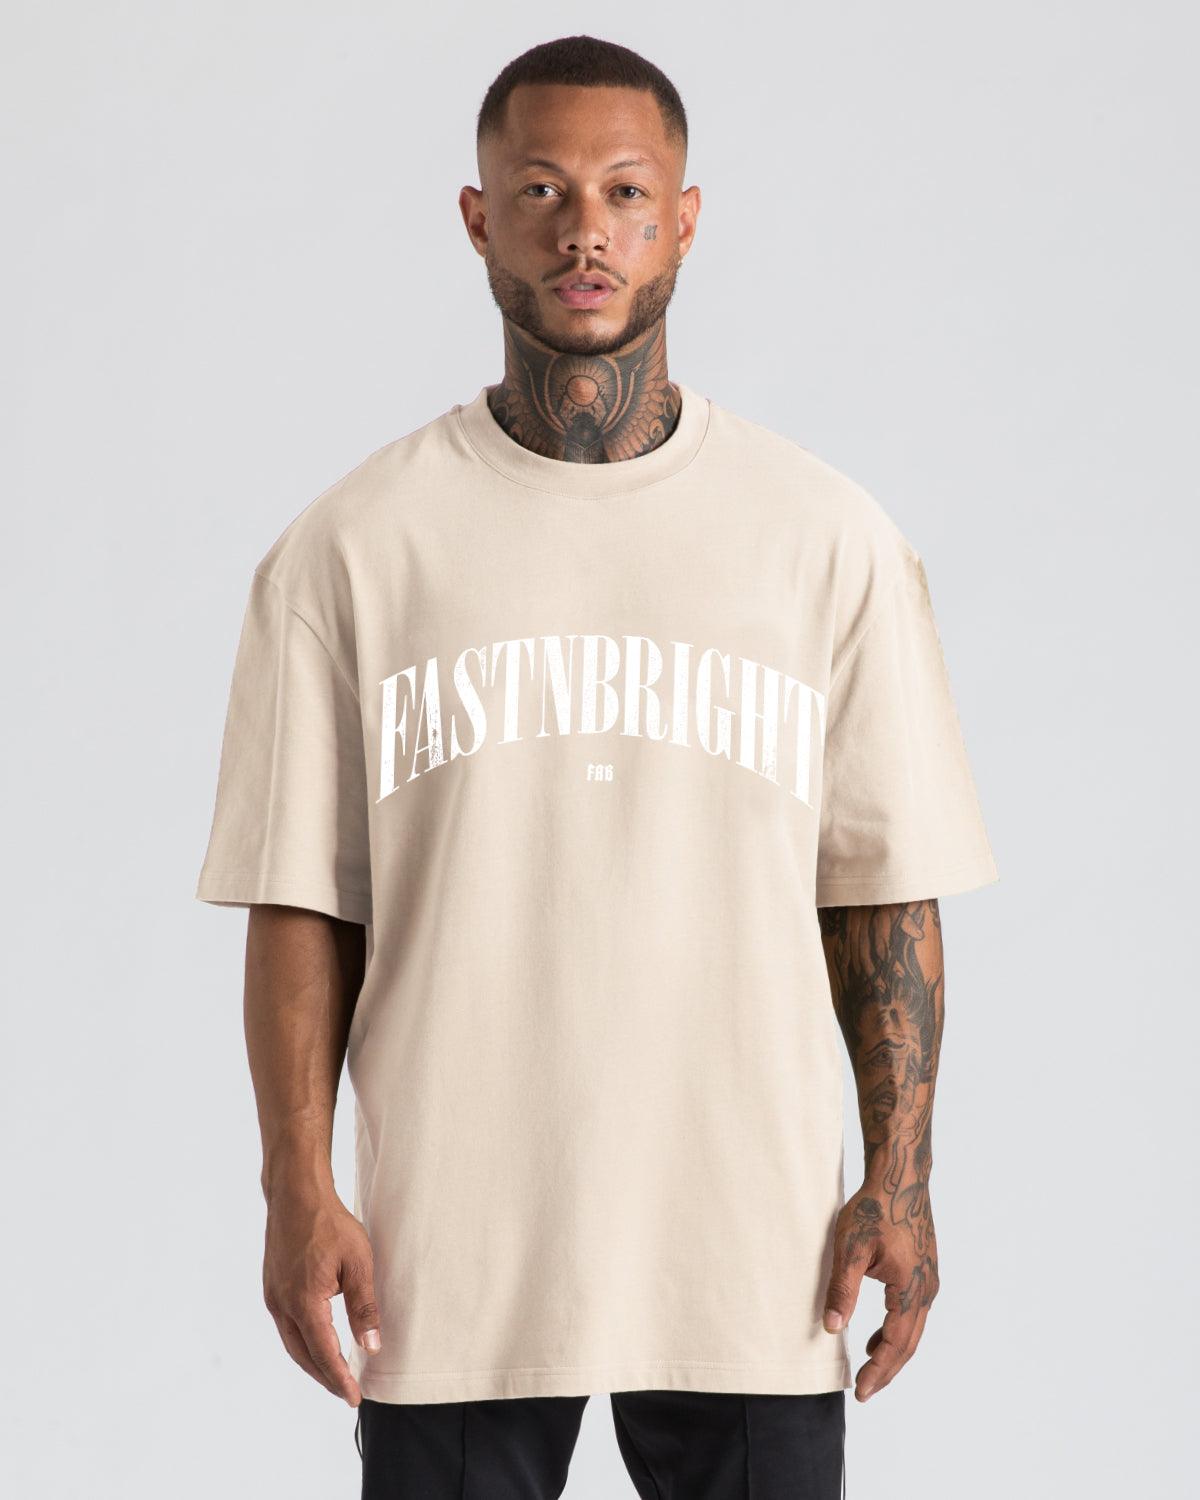 FASTNBRIGHT Tee - FAST AND BRIGHT